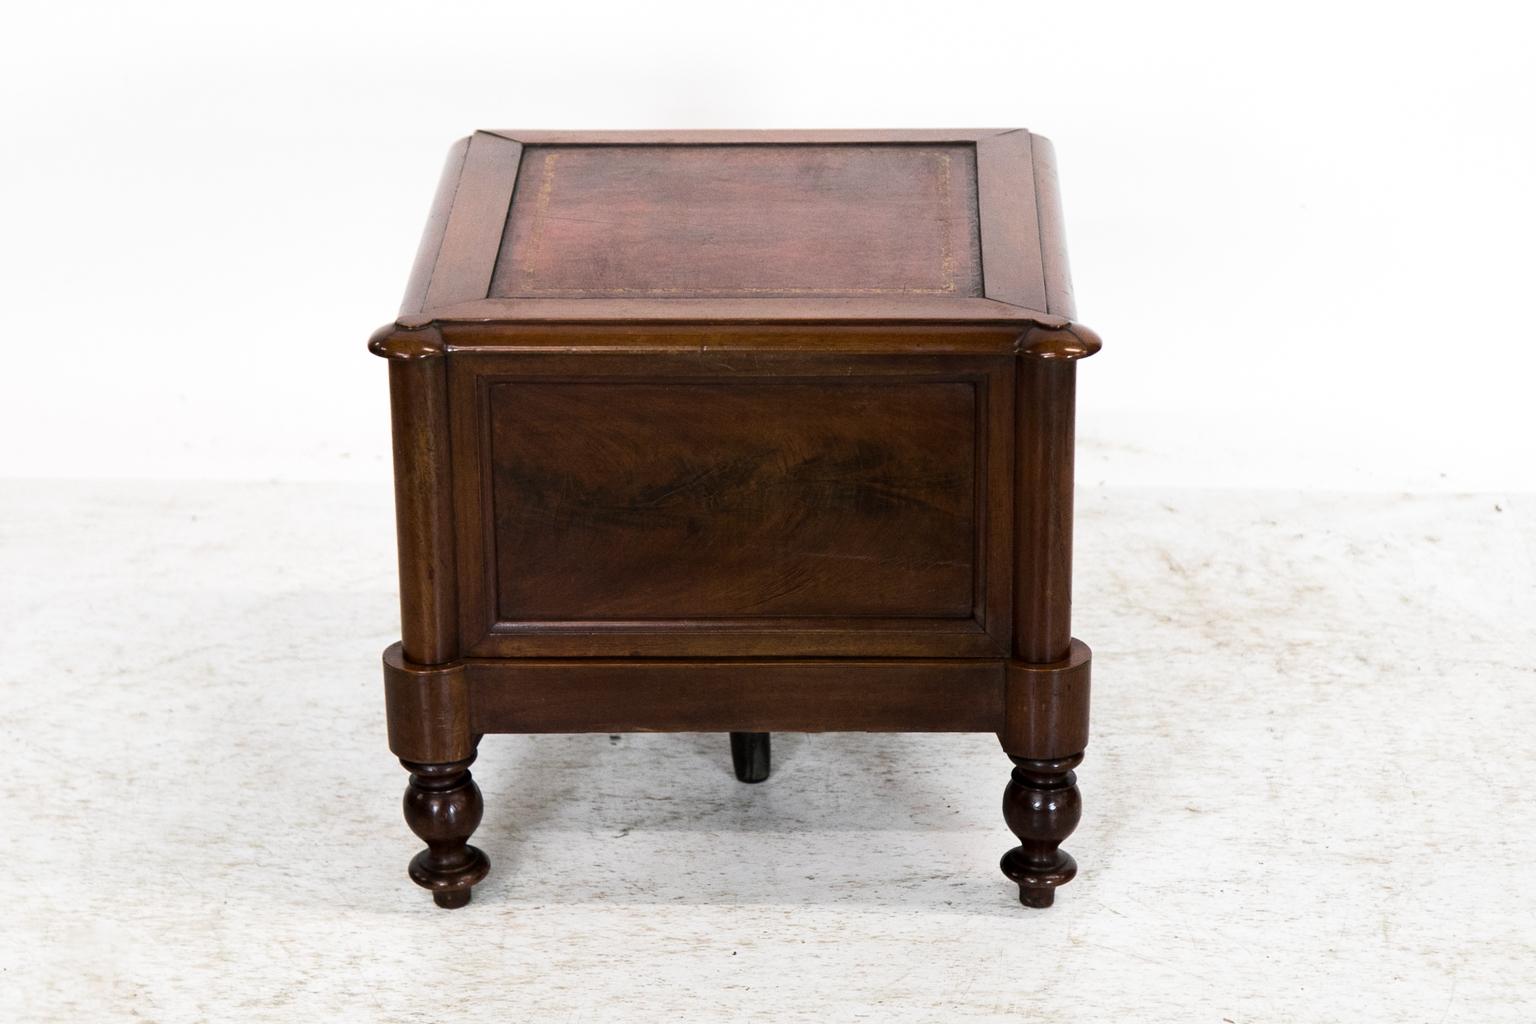 This mahogany leather top commode has turned front columns that terminate in turned legs. The front has a recessed flame mahogany panel framed with shaped molding. The top has an inset panel with gold and blind tooled leather. The interior retains